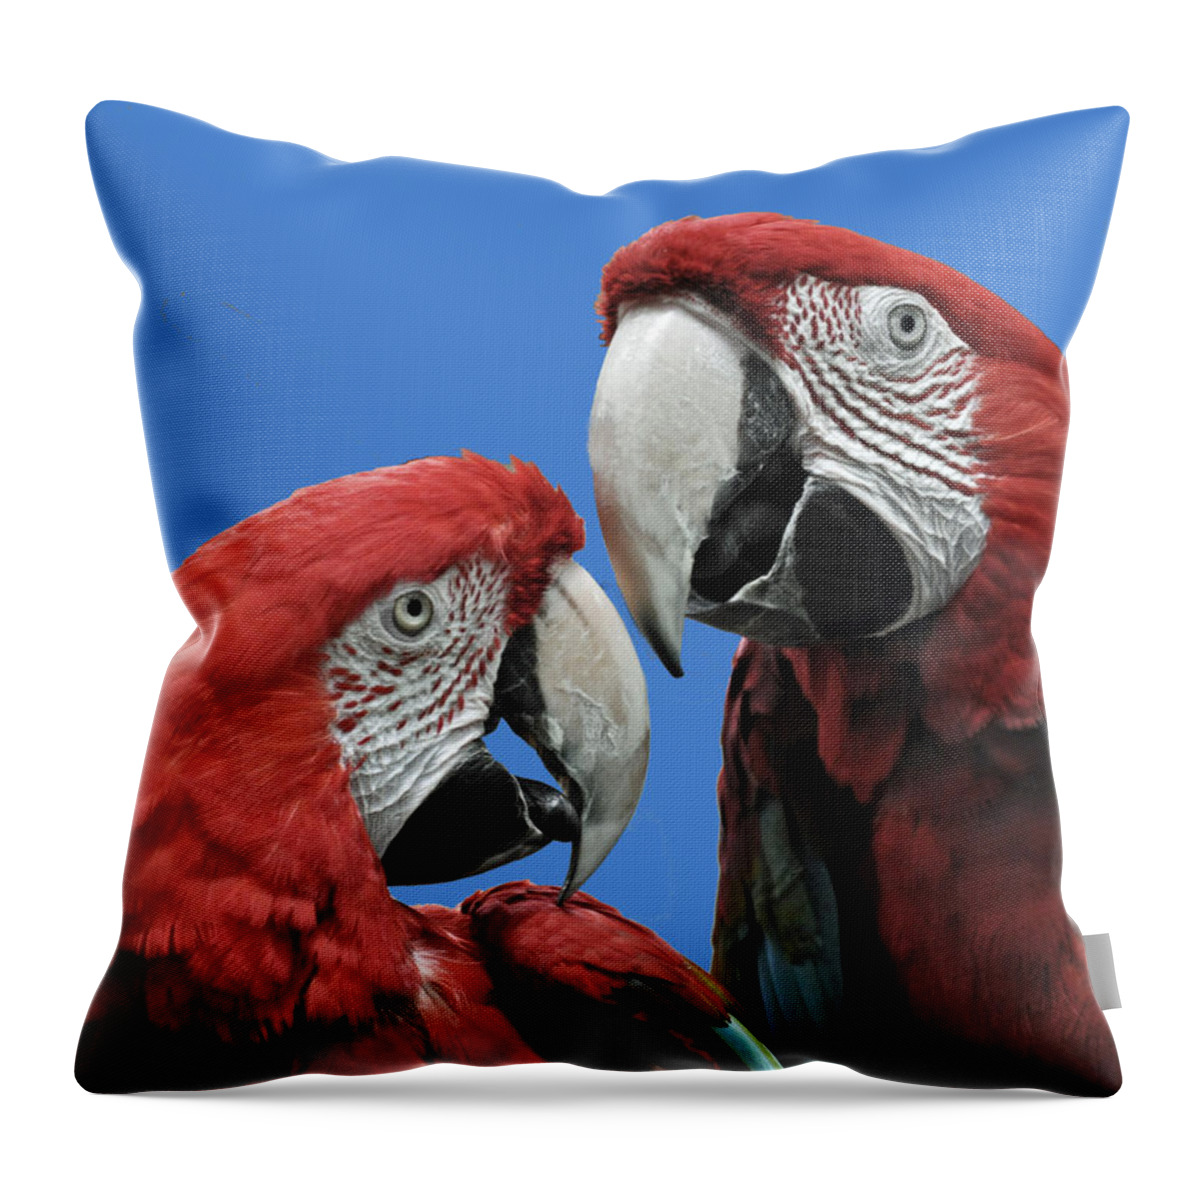 Parrot Throw Pillow featuring the photograph I Told You So by Rodney Campbell